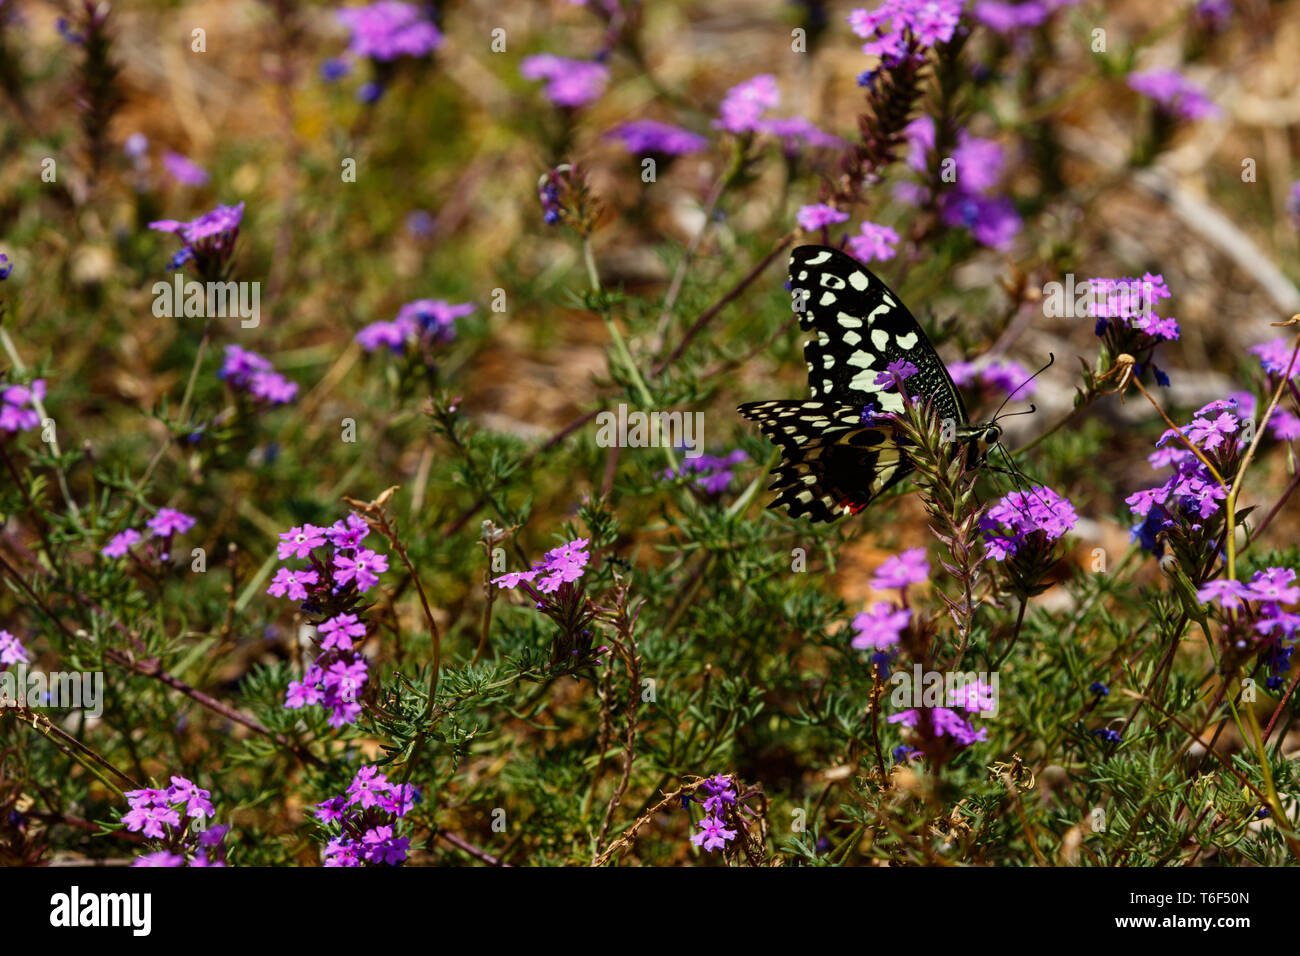 Black and white Butterfly sitting on purple flowers Stock Photo